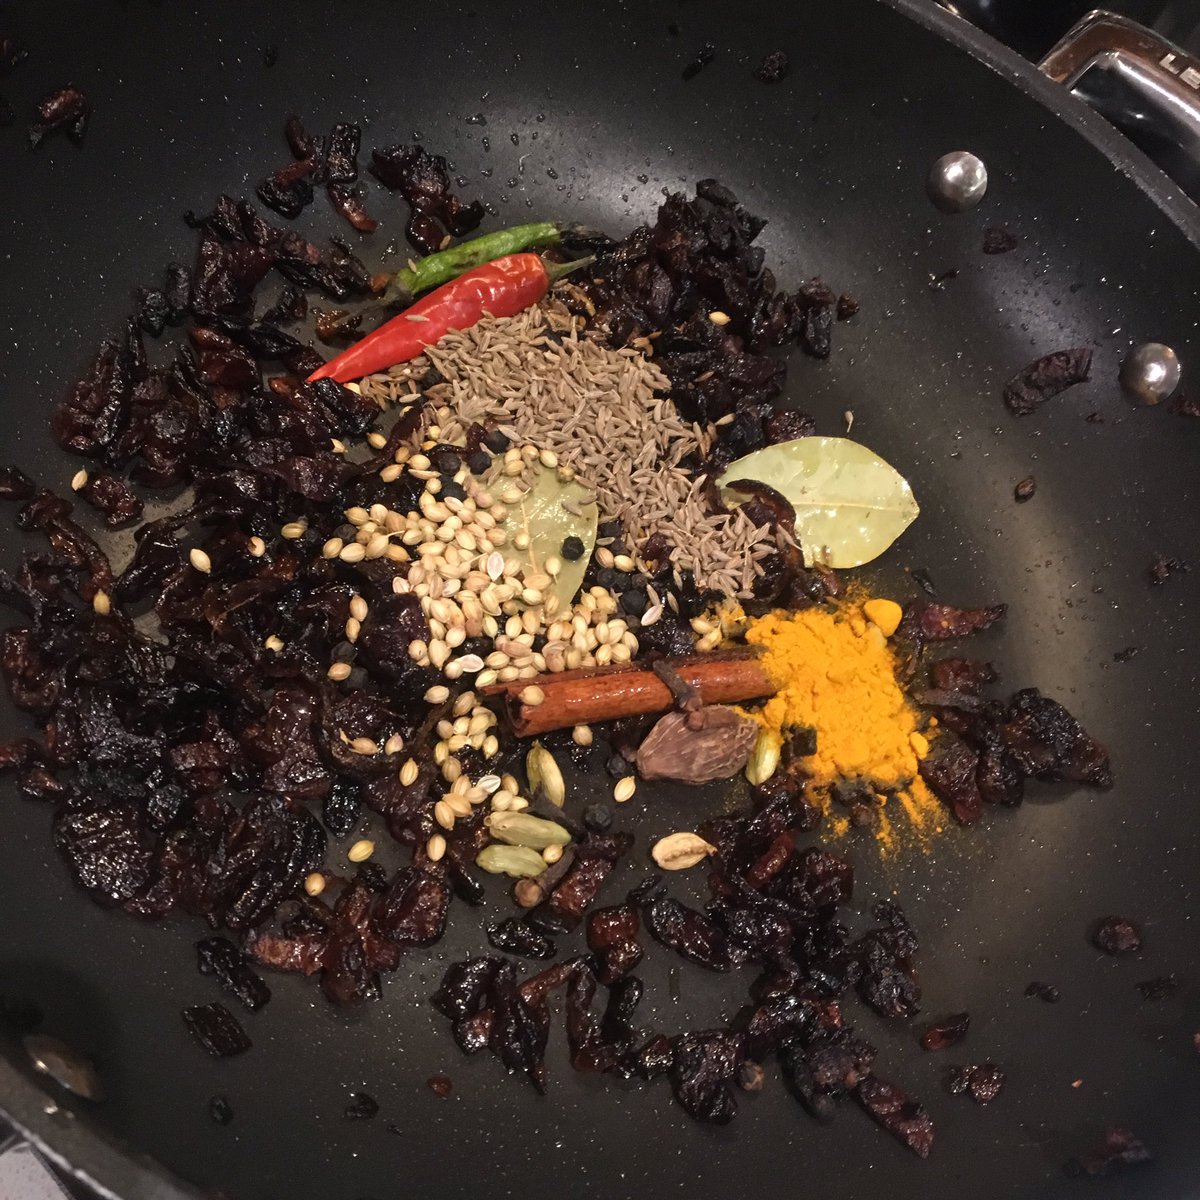 Set half the onions aside then add a dab more ghee, bay leaves, cinnamon stick, 2 whole chillies (stabbed), coriander seeds, cumin, turmeric, 6 cardamon green, 1 black, 6 cloves and a teaspoon of black peppercorns (whole). Toast em up till smell is unbelievable.